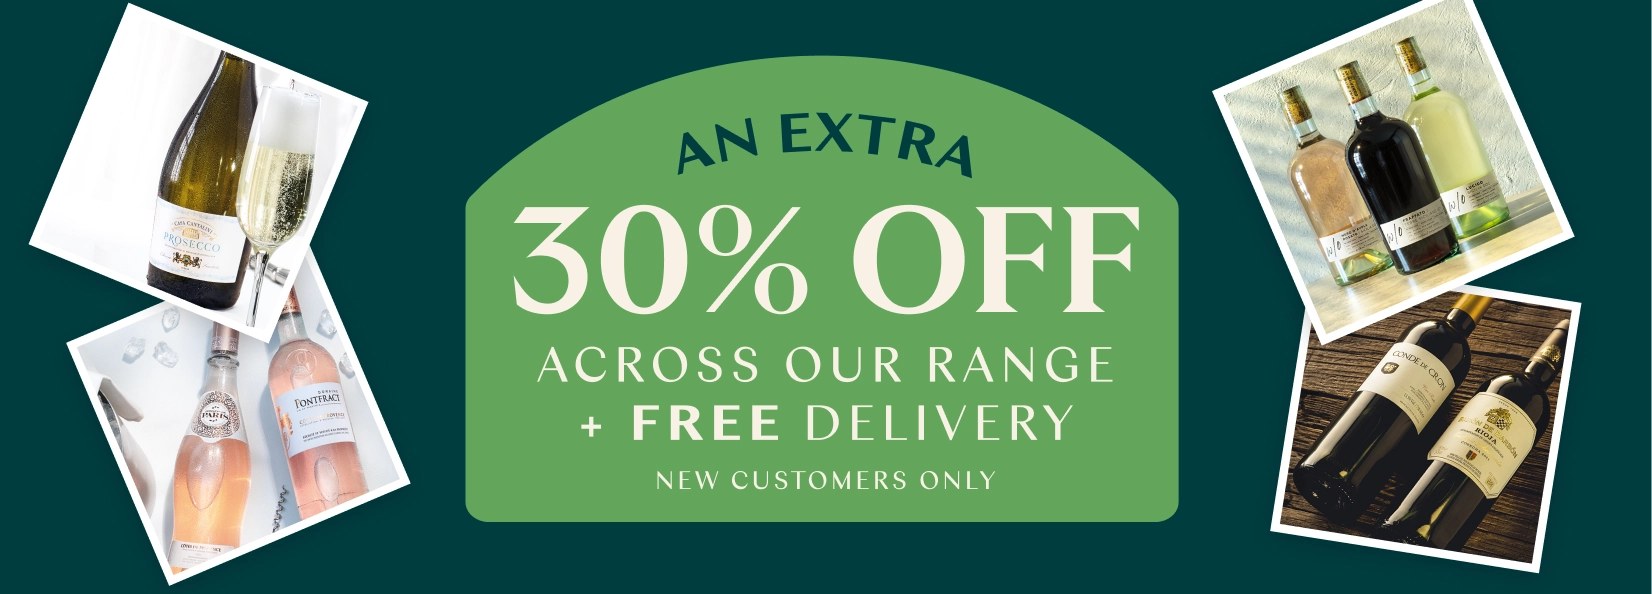 An extra 30% OFF - across our range + Free Delivery